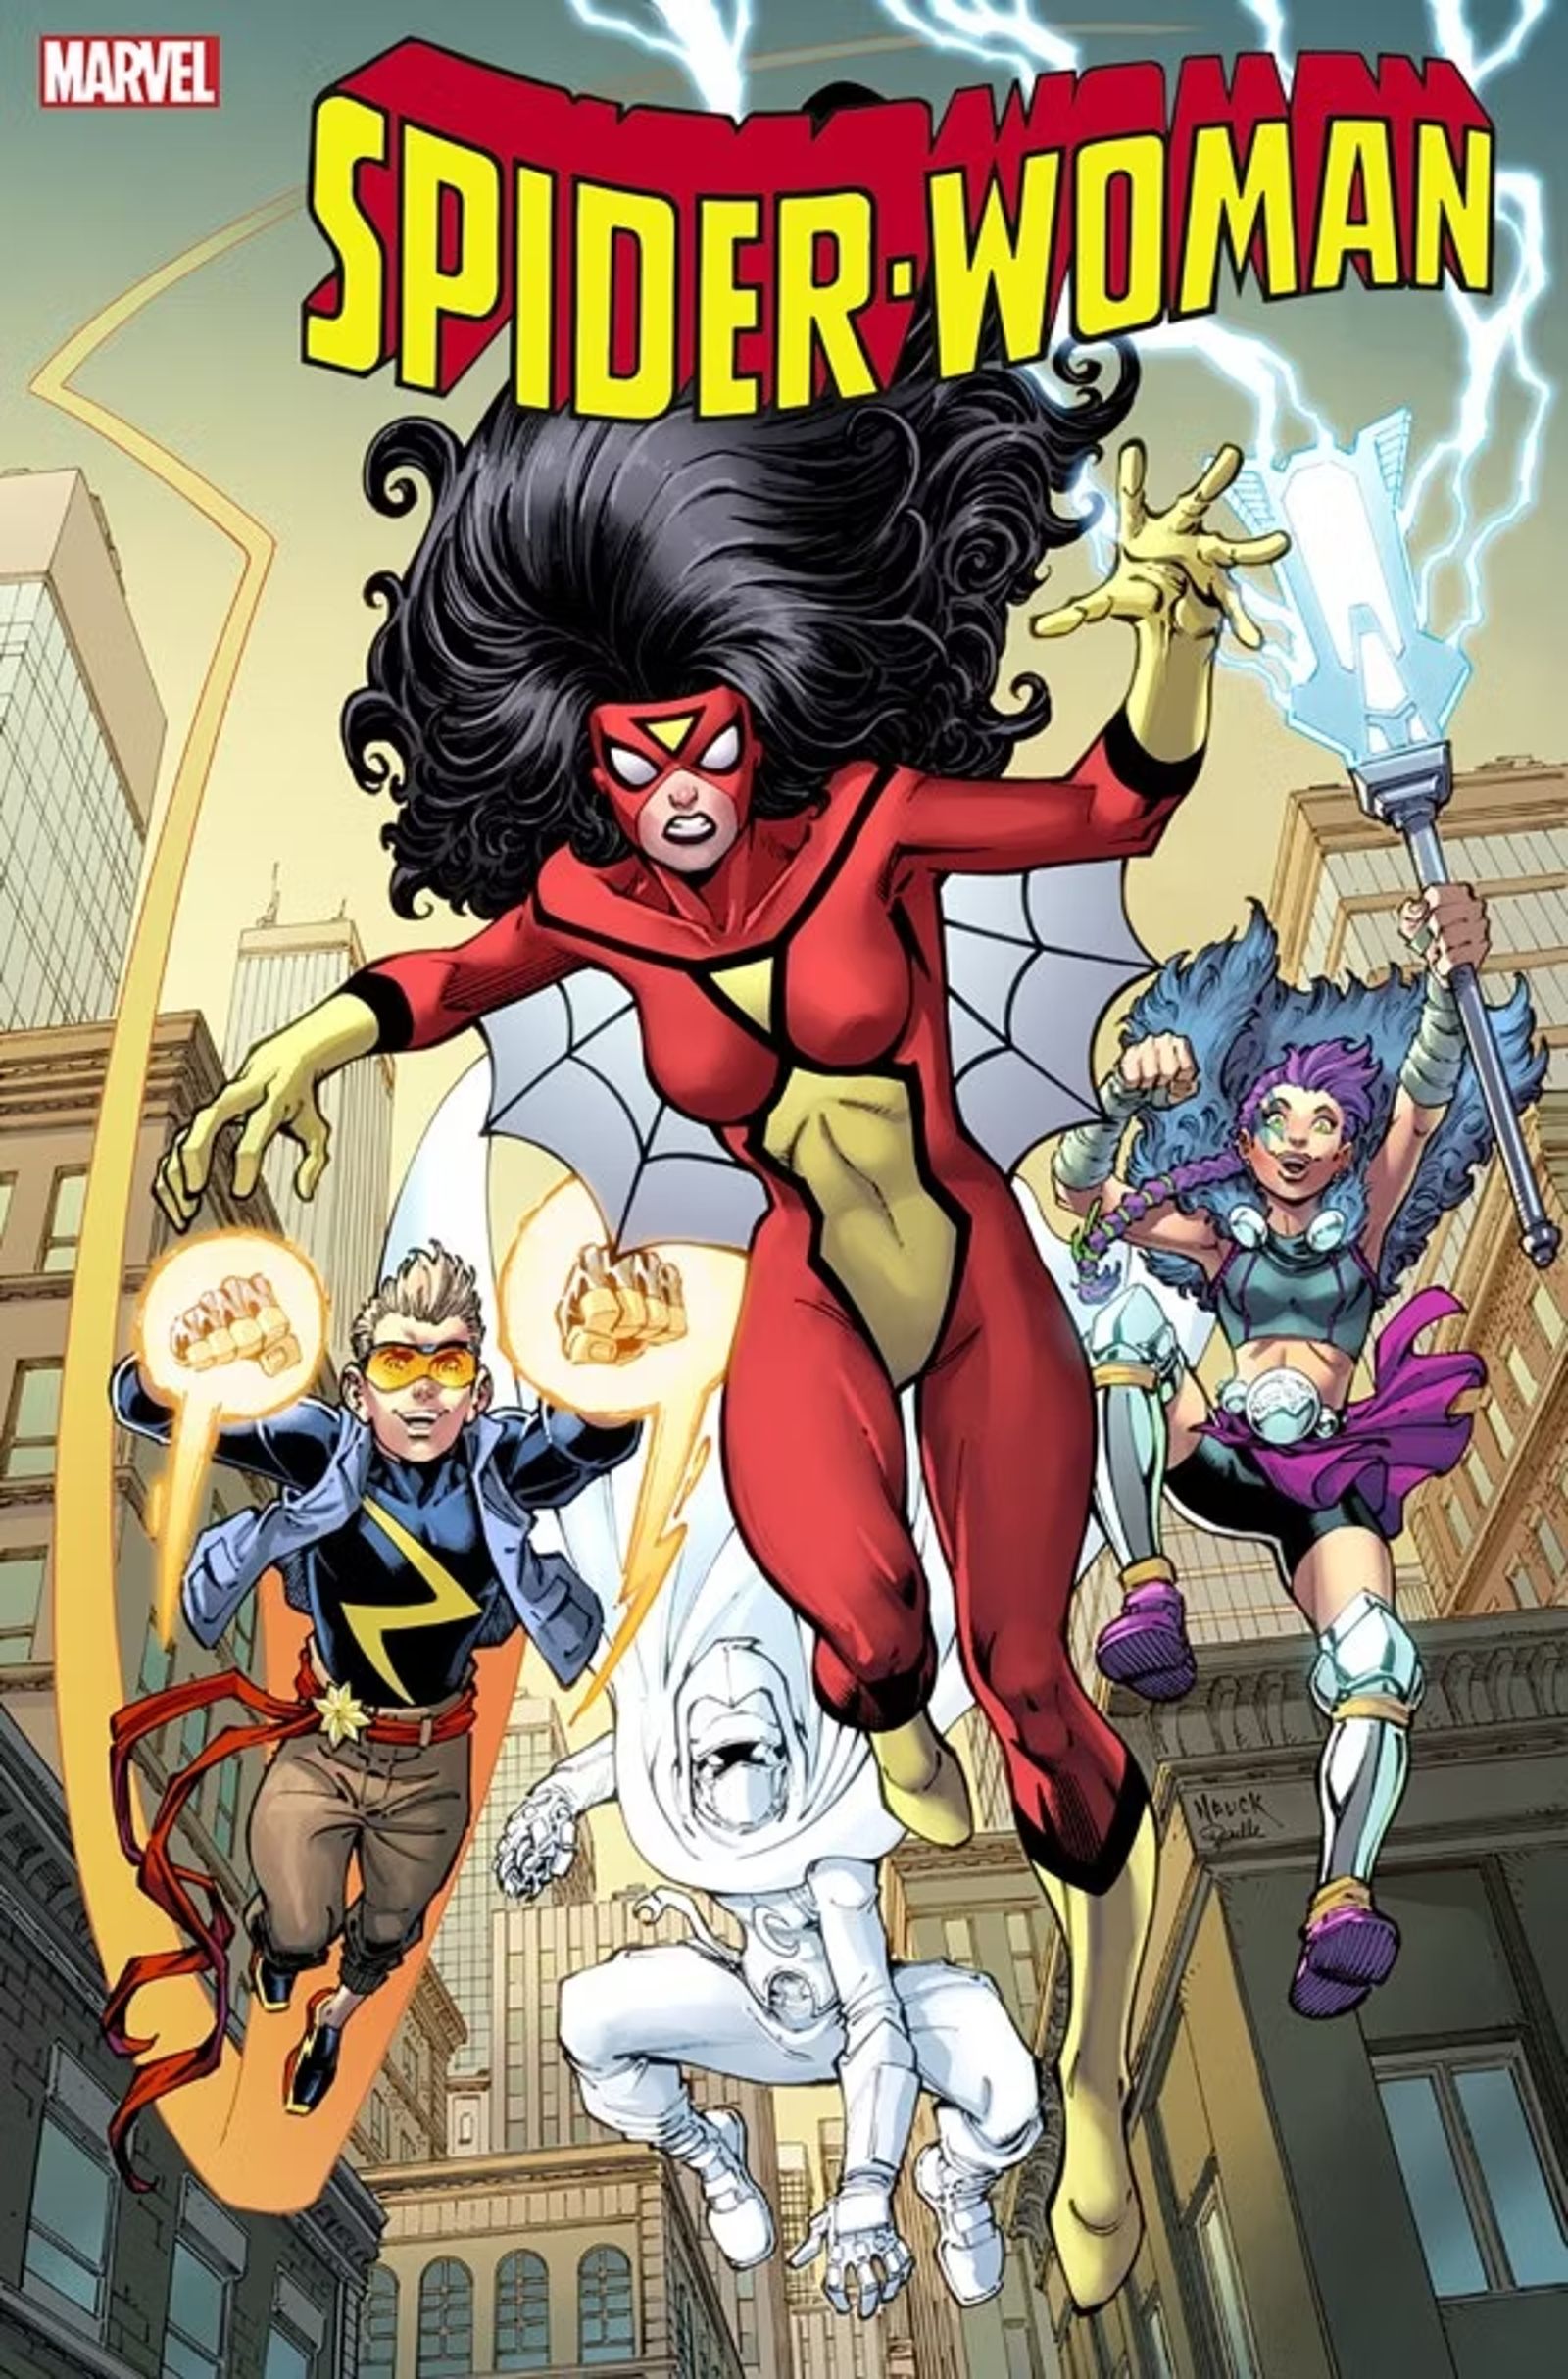 Spider-Woman #7, Todd Nauck variant cover, Jessica Drew leading the New Champions into battle.